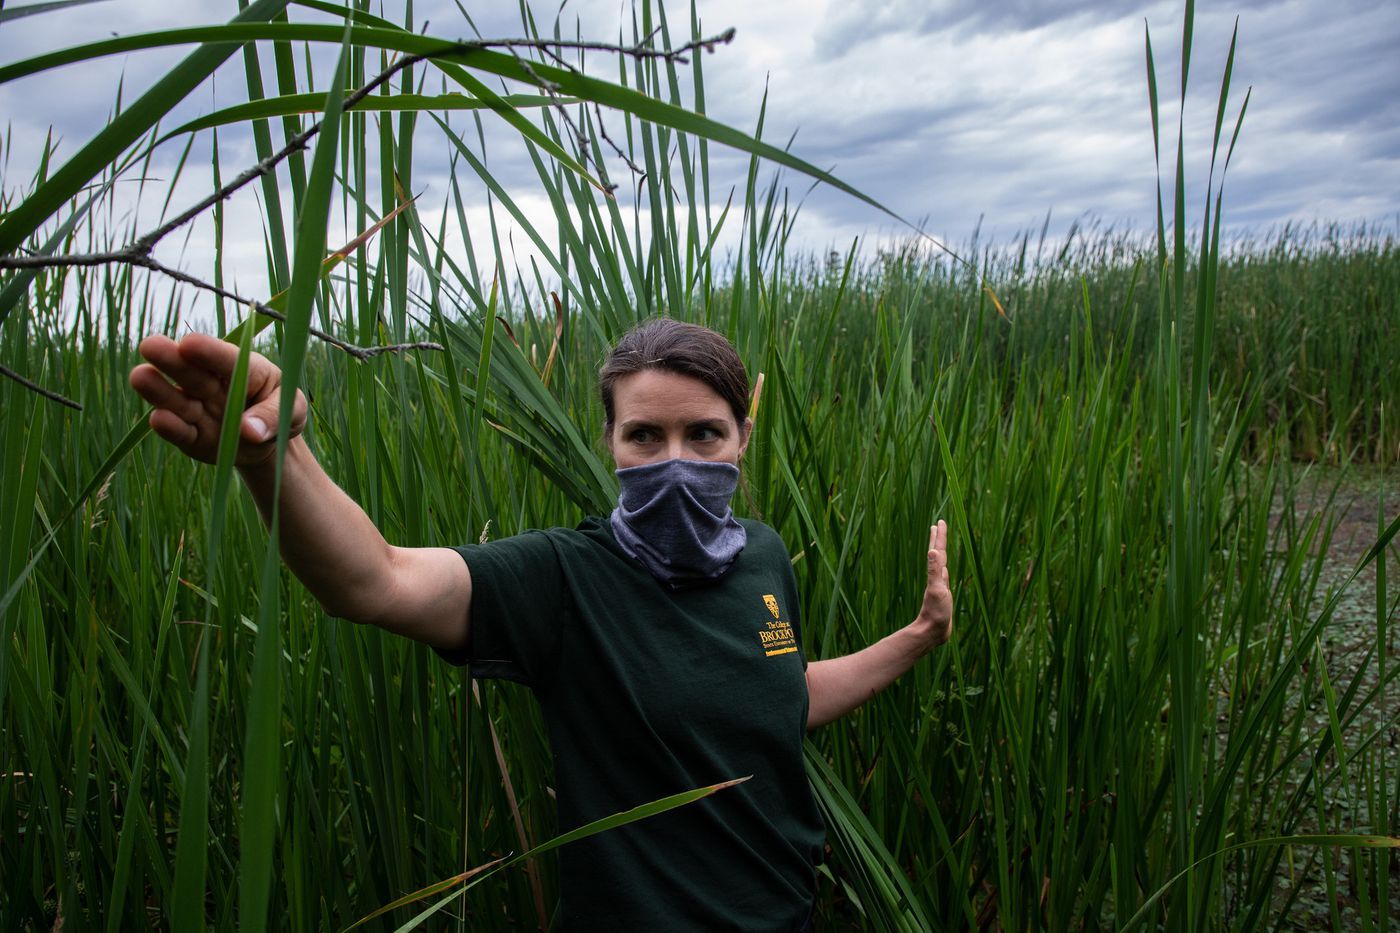 Rachel Schultz, associate professor of wetland science at SUNY Brockport, looks at an invasive cattail species as she visits sites of her wetlands research project on Lake Ontario at Braddock Bay in Greece, New York, on July 29, 2020. She researches how Lake Ontario’s coastal wetlands have been affected by the water level fluctuations. Image by Zbigniew Bzdak / Chicago Tribune. United States, 2020.